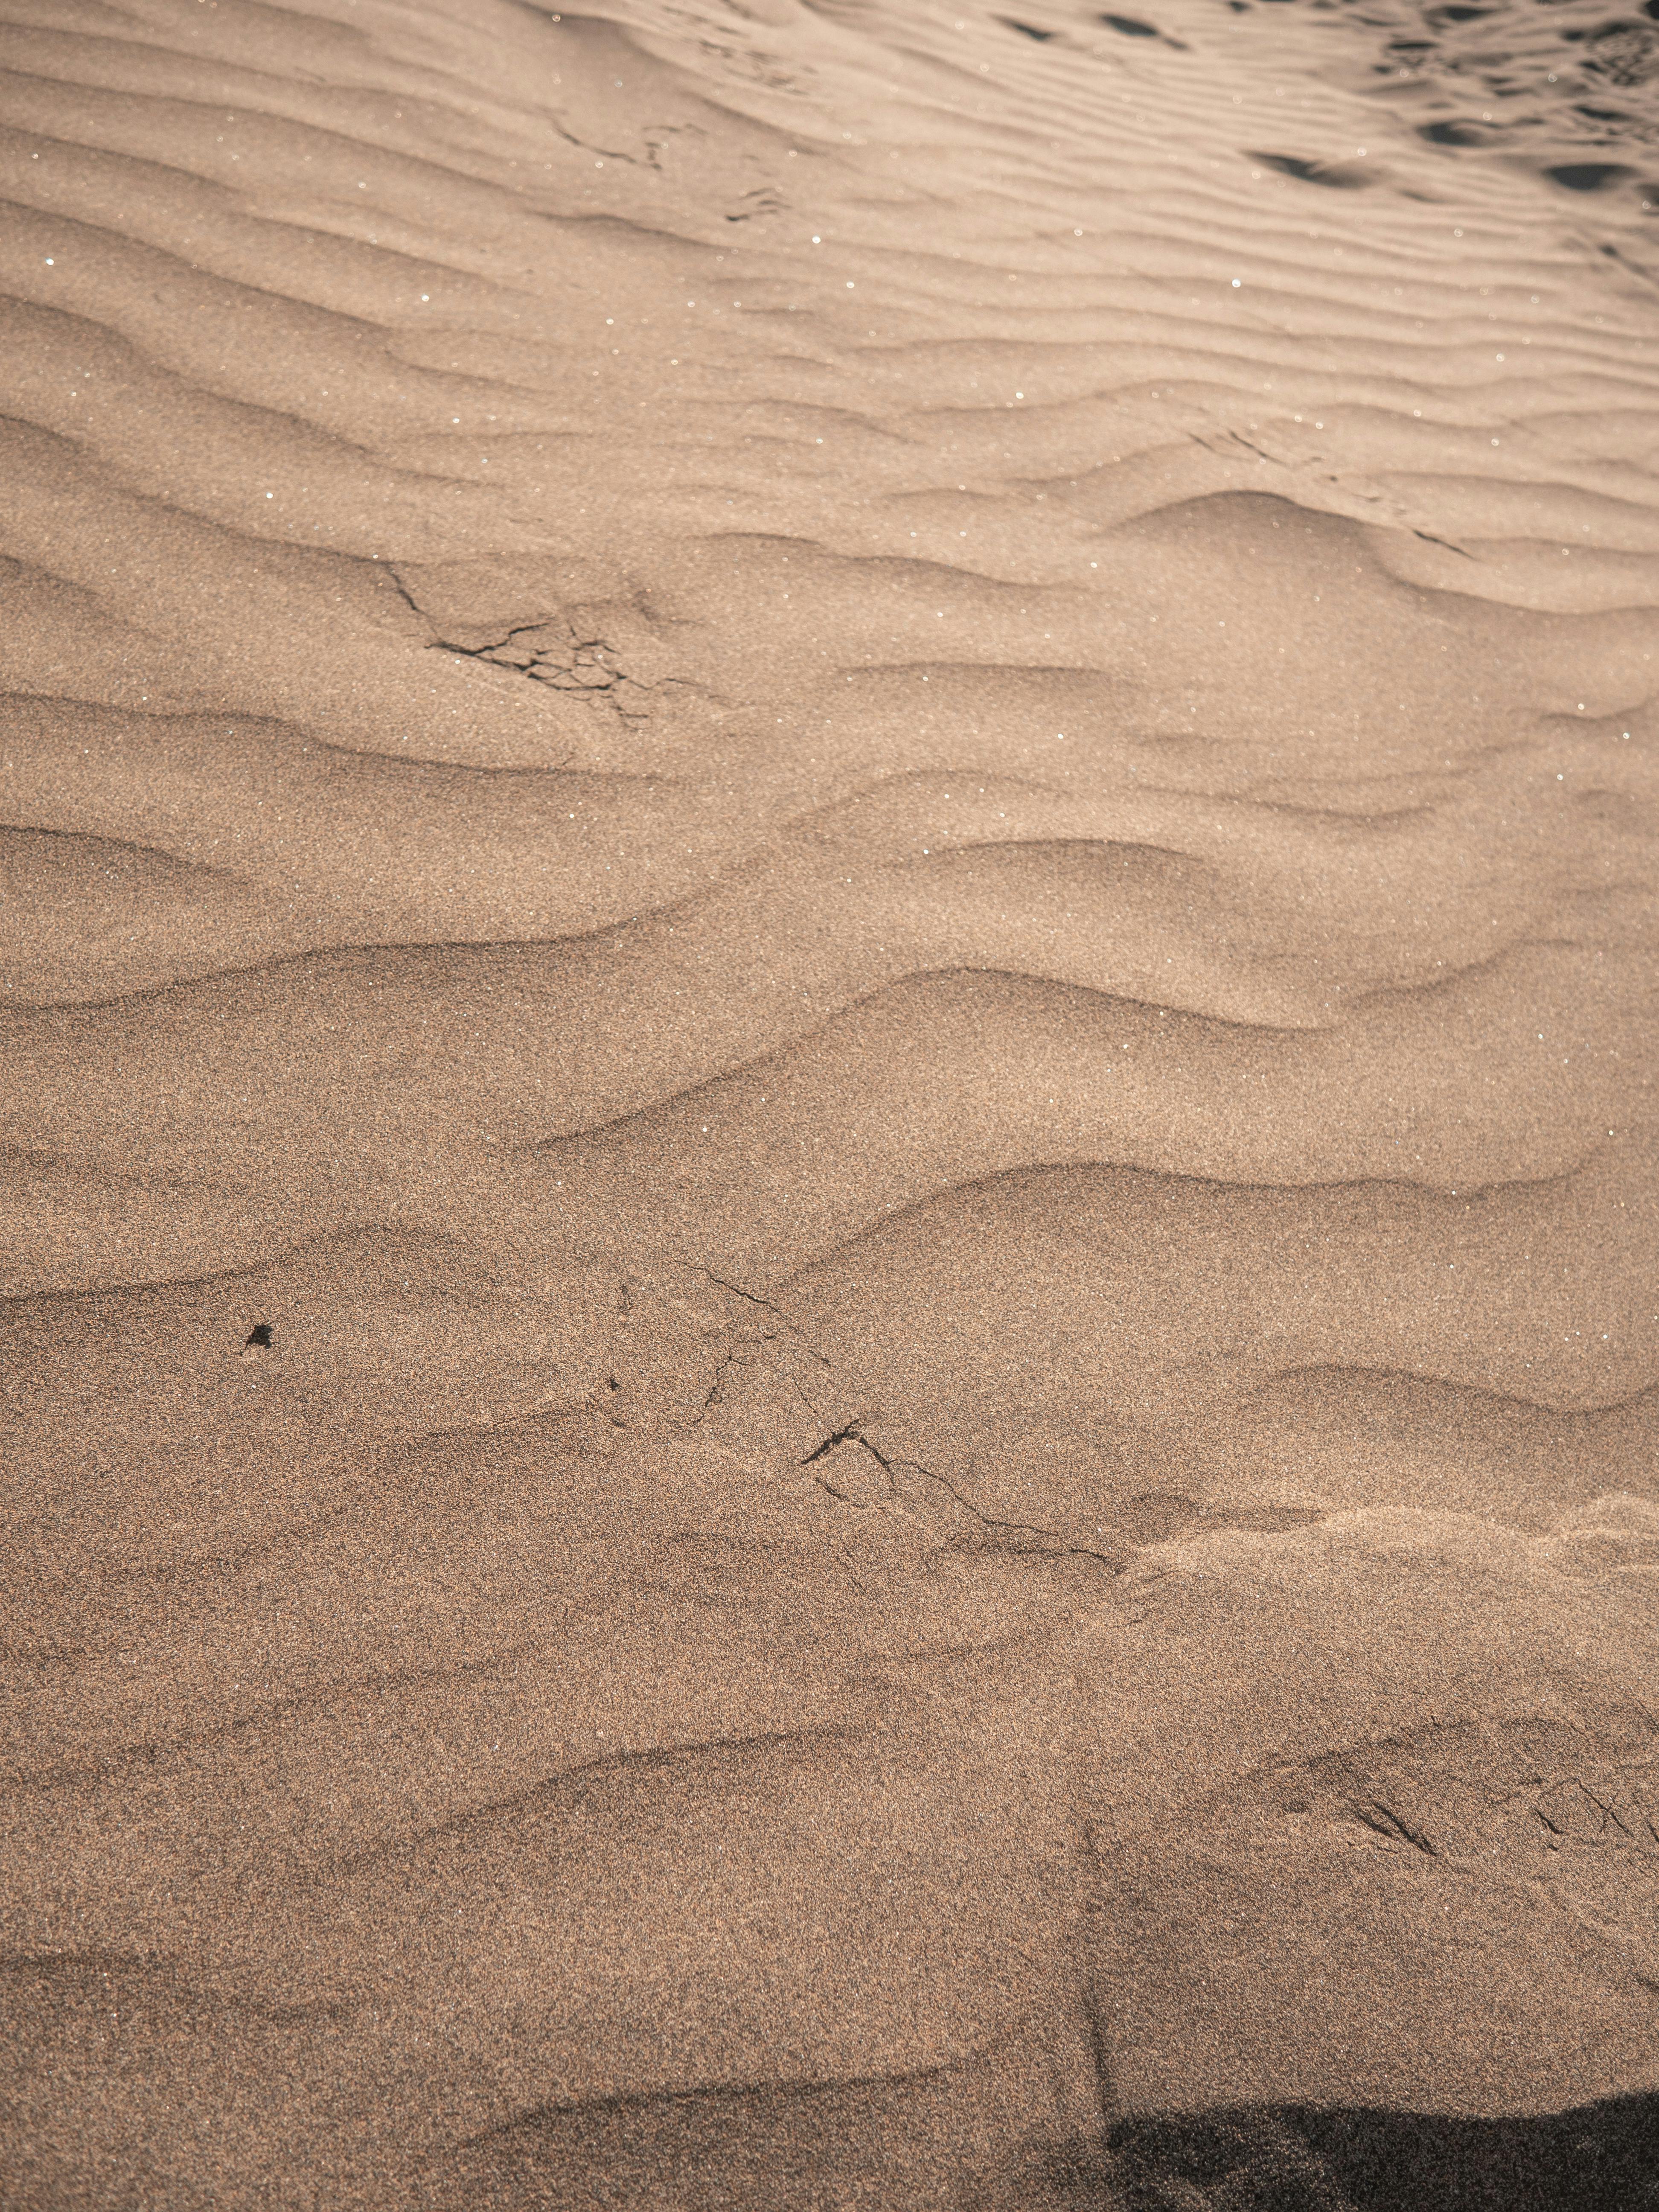 Sand Photos, Download The BEST Free Sand Stock Photos & HD Images